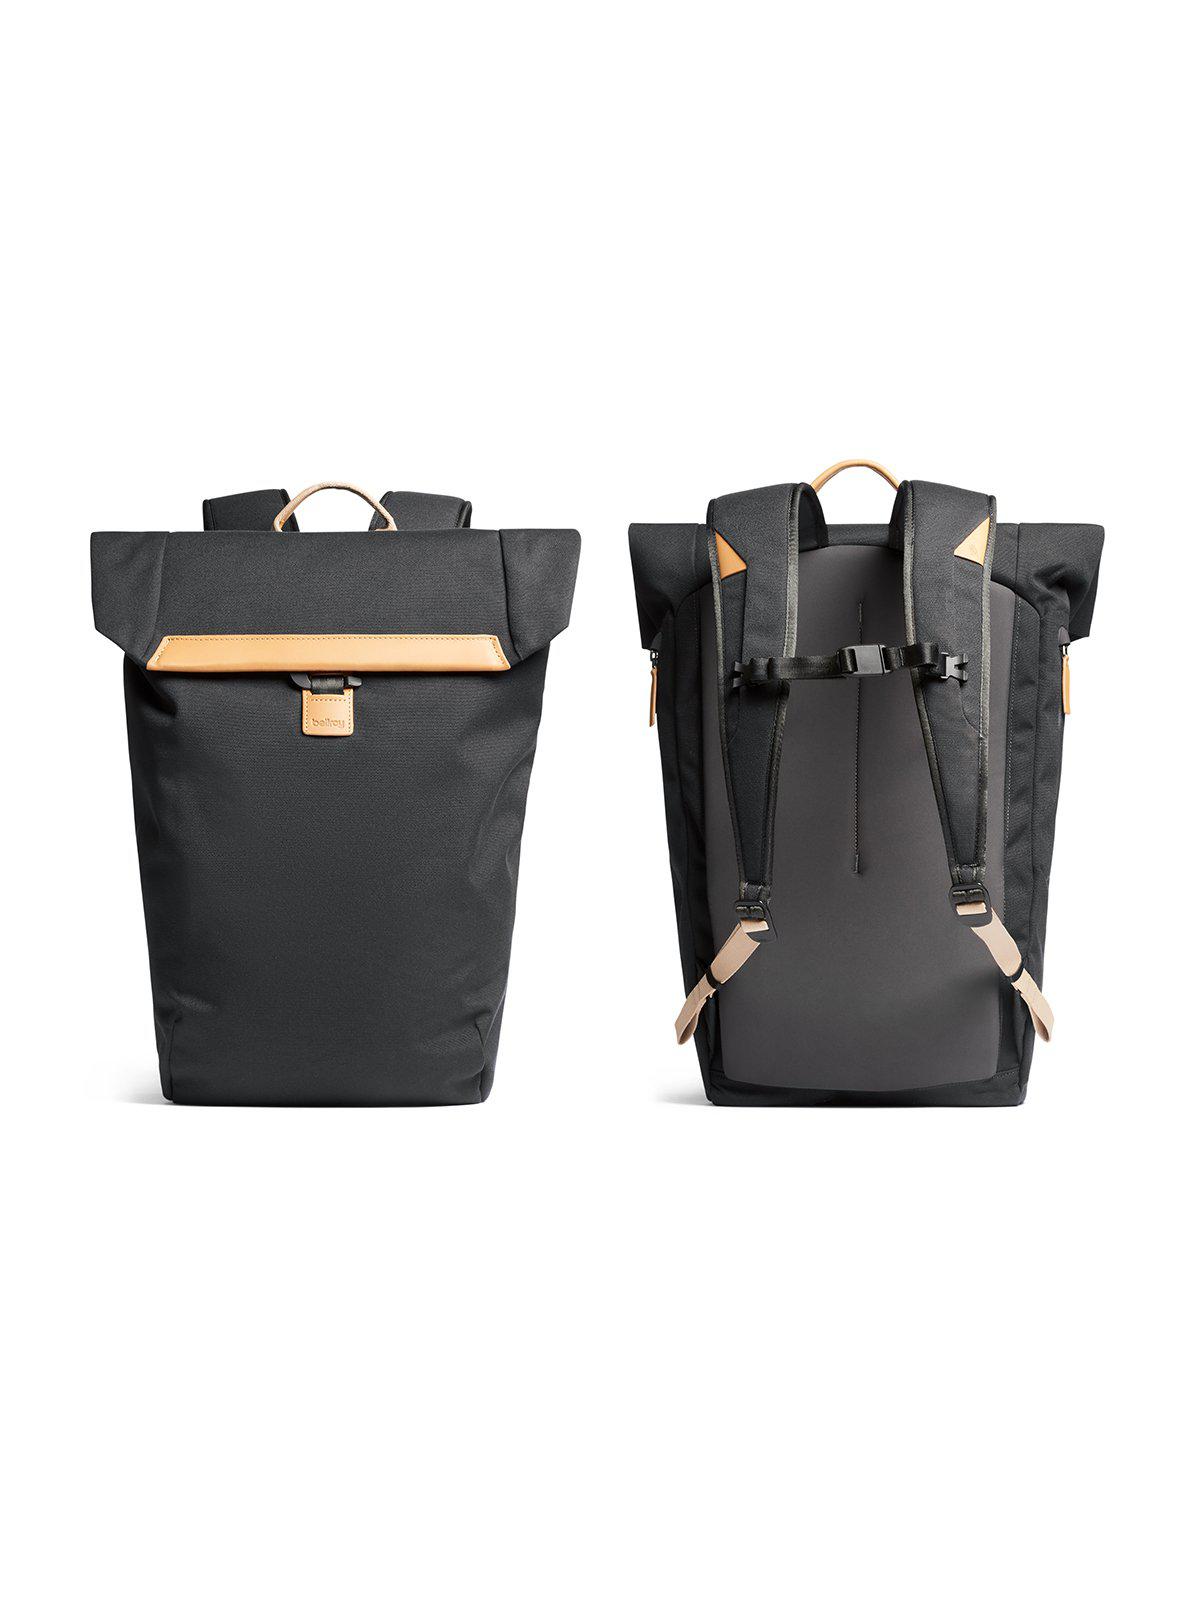 Bellroy Shift Backpack Charcoal Recycled - MORE by Morello Indonesia